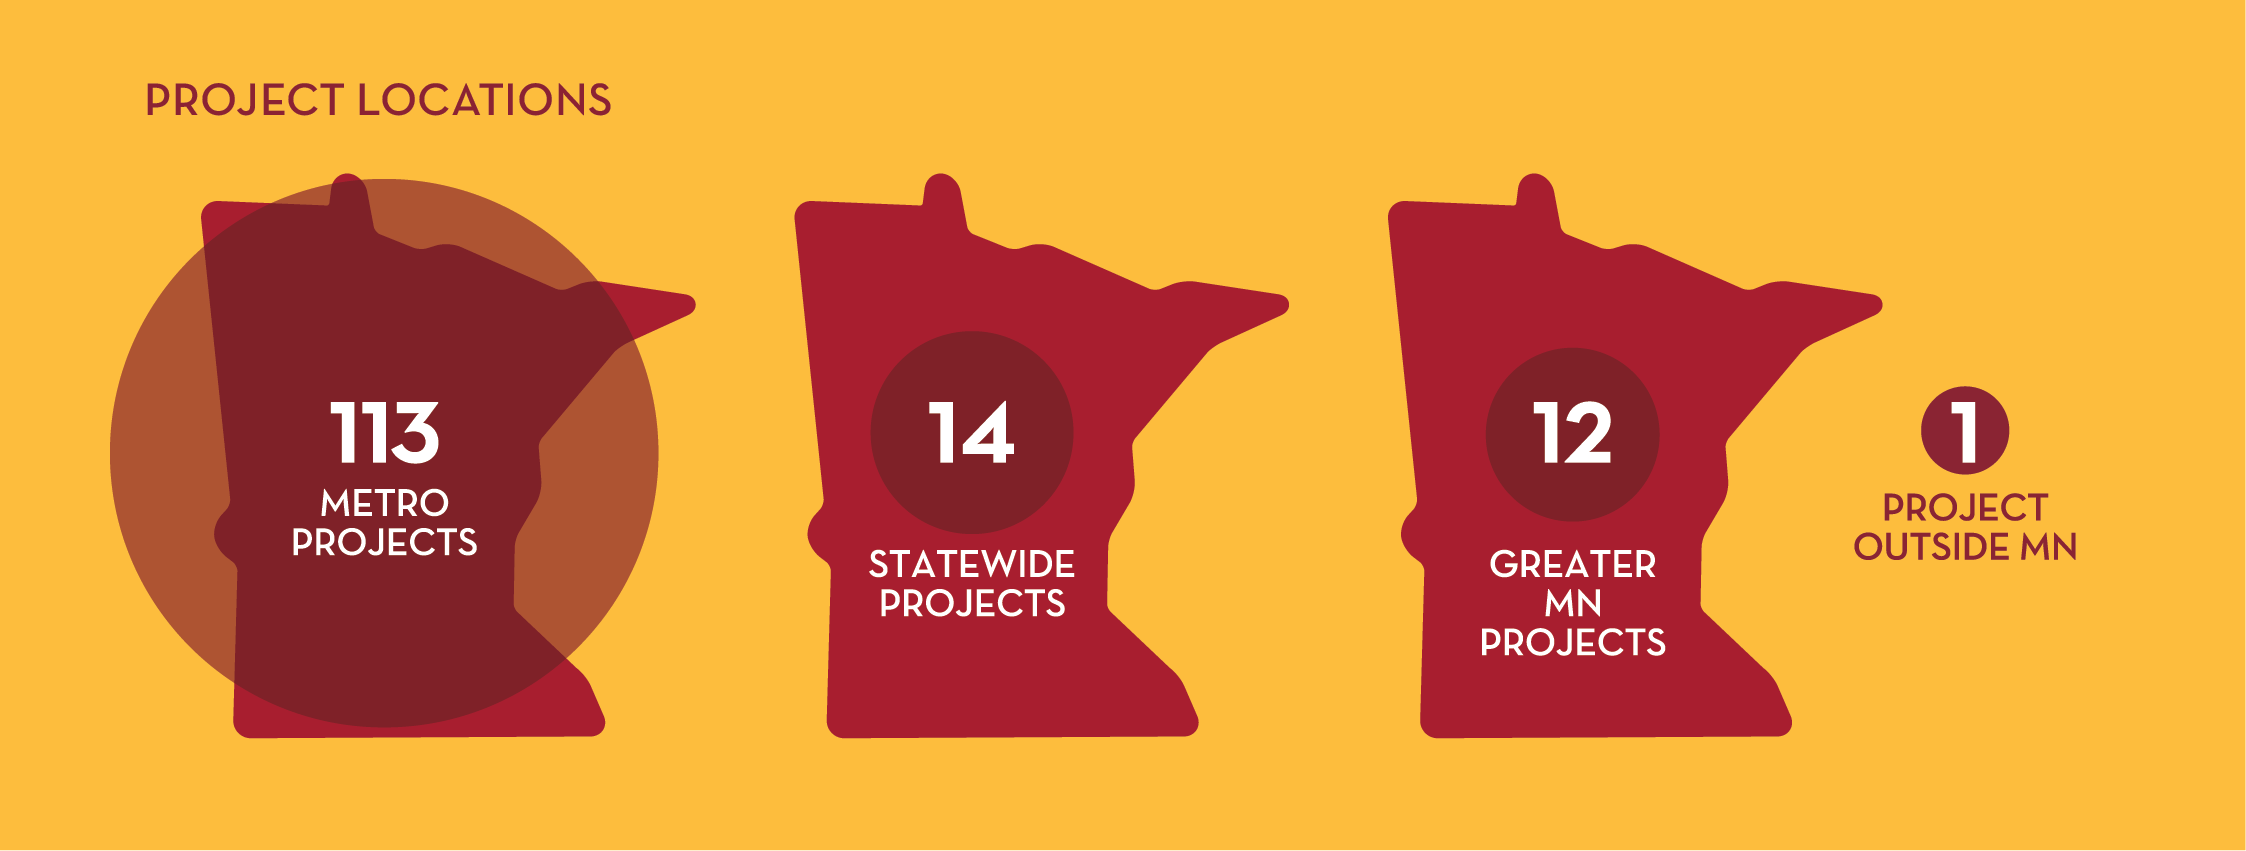 PROJECT LOCATIONS: 113 METRO PROJECTS; 14 STATEWIDE PROJECTS; 12 GREATER MN PROJECTS; 1 PROJECT OUTSIDE MN